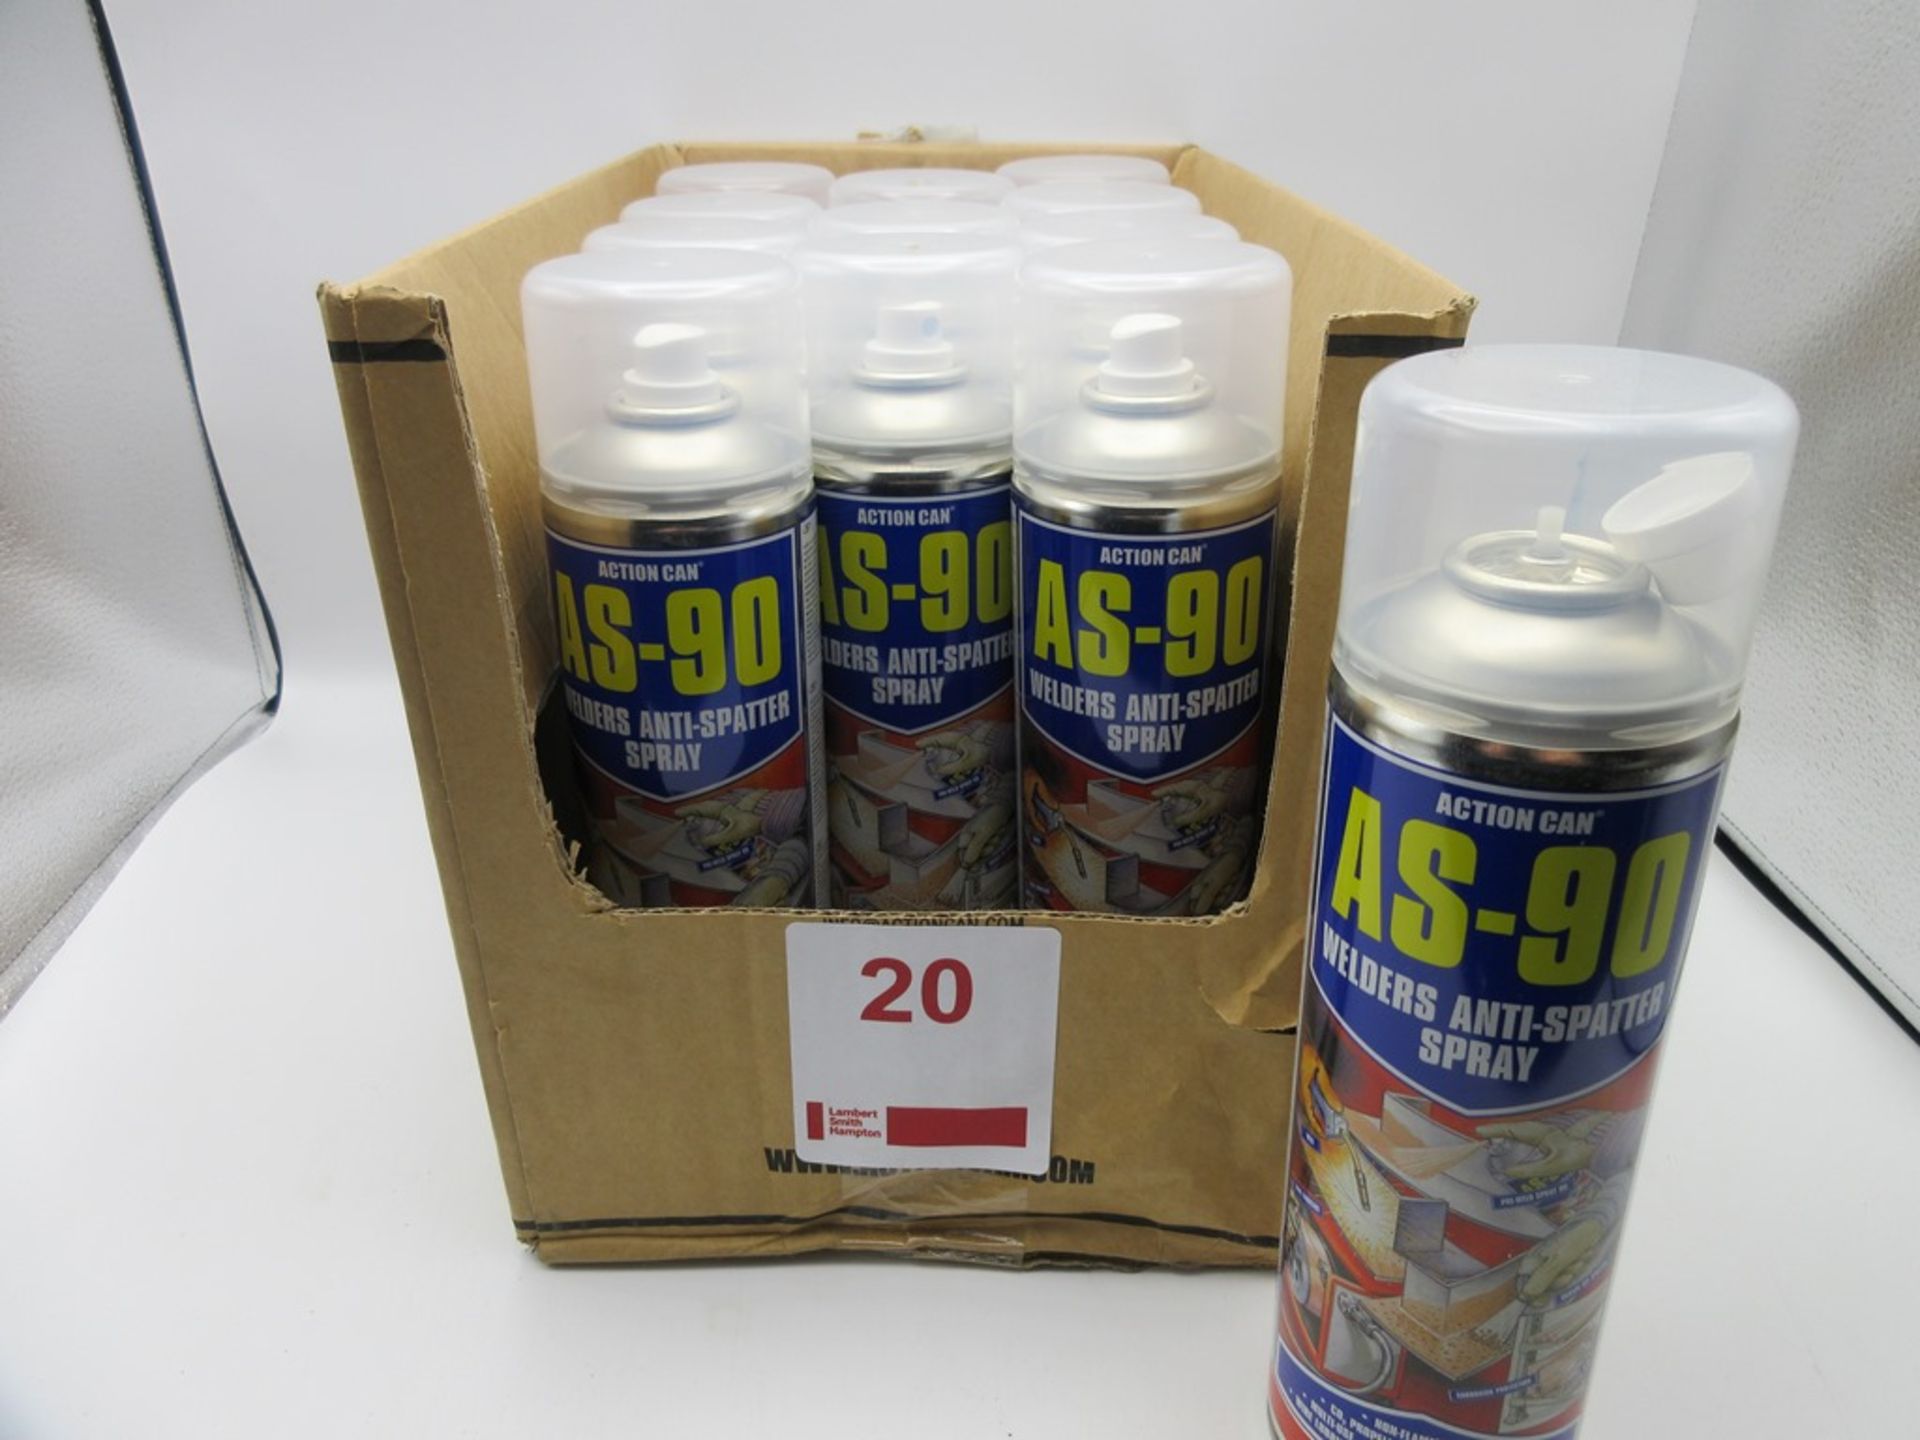 AS-90 Welders anti-spatter spray cans, 12 off